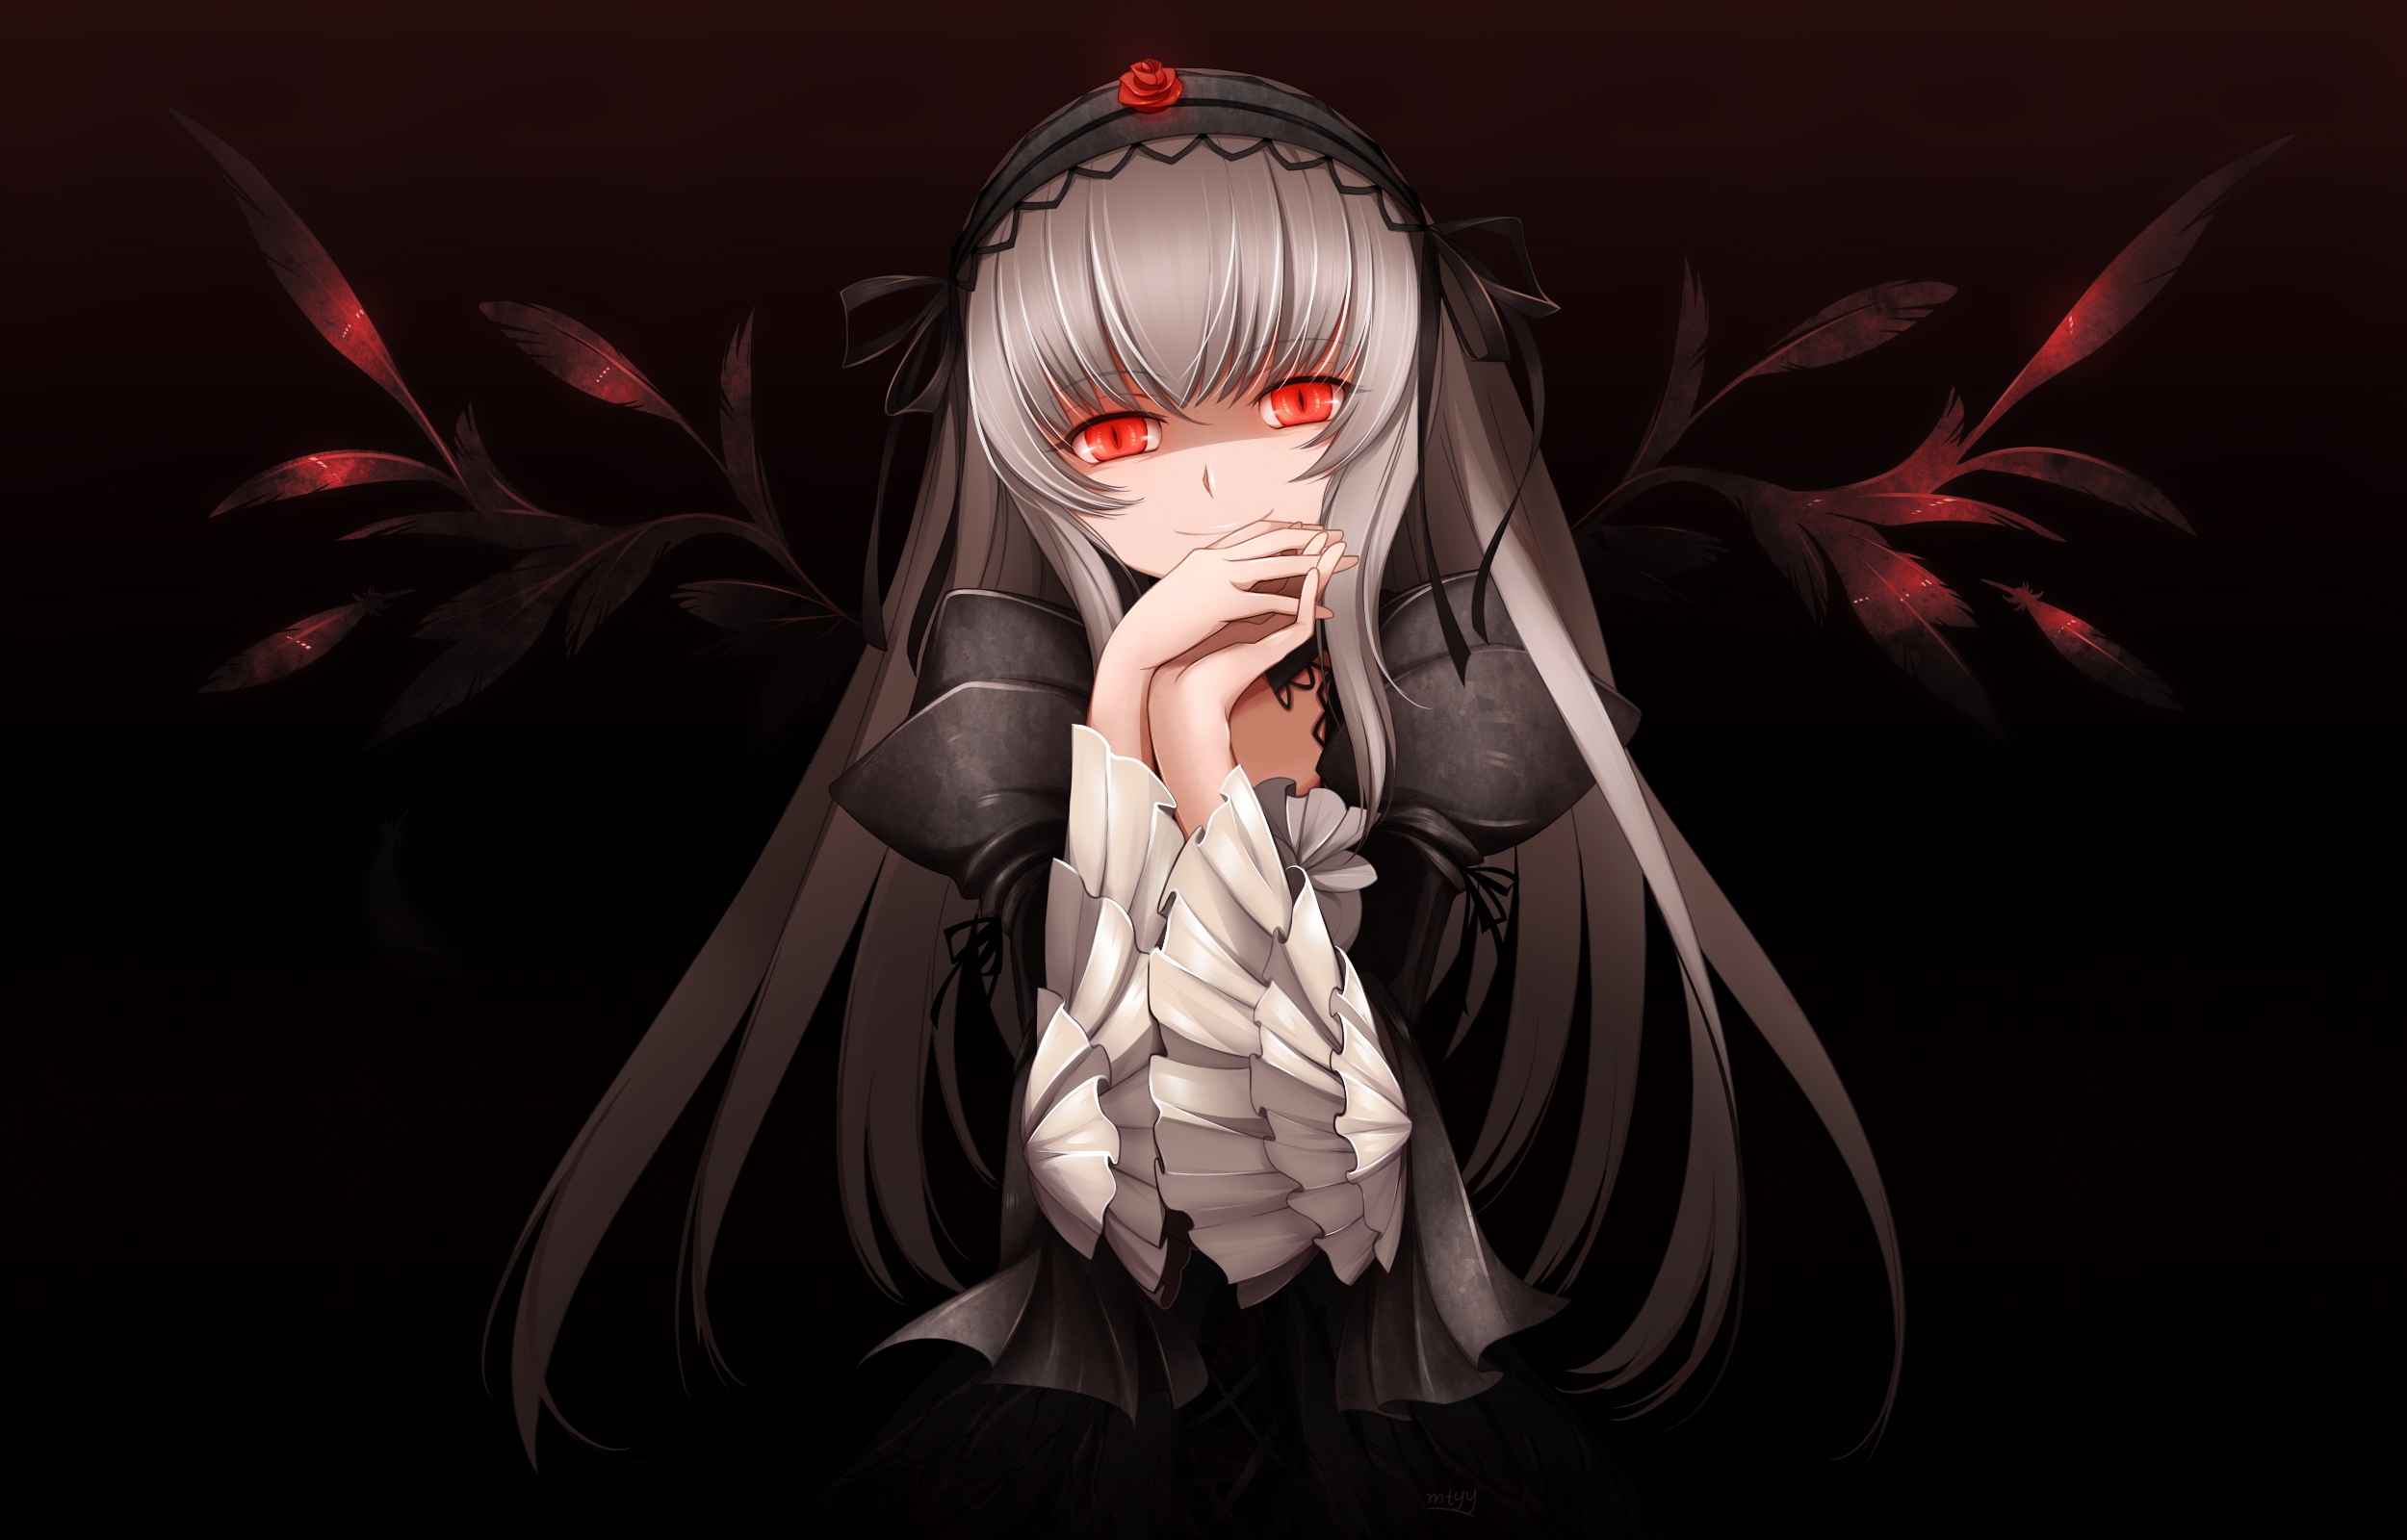 Download wallpaper 2500x1600 anime girl gothic eyes red hd